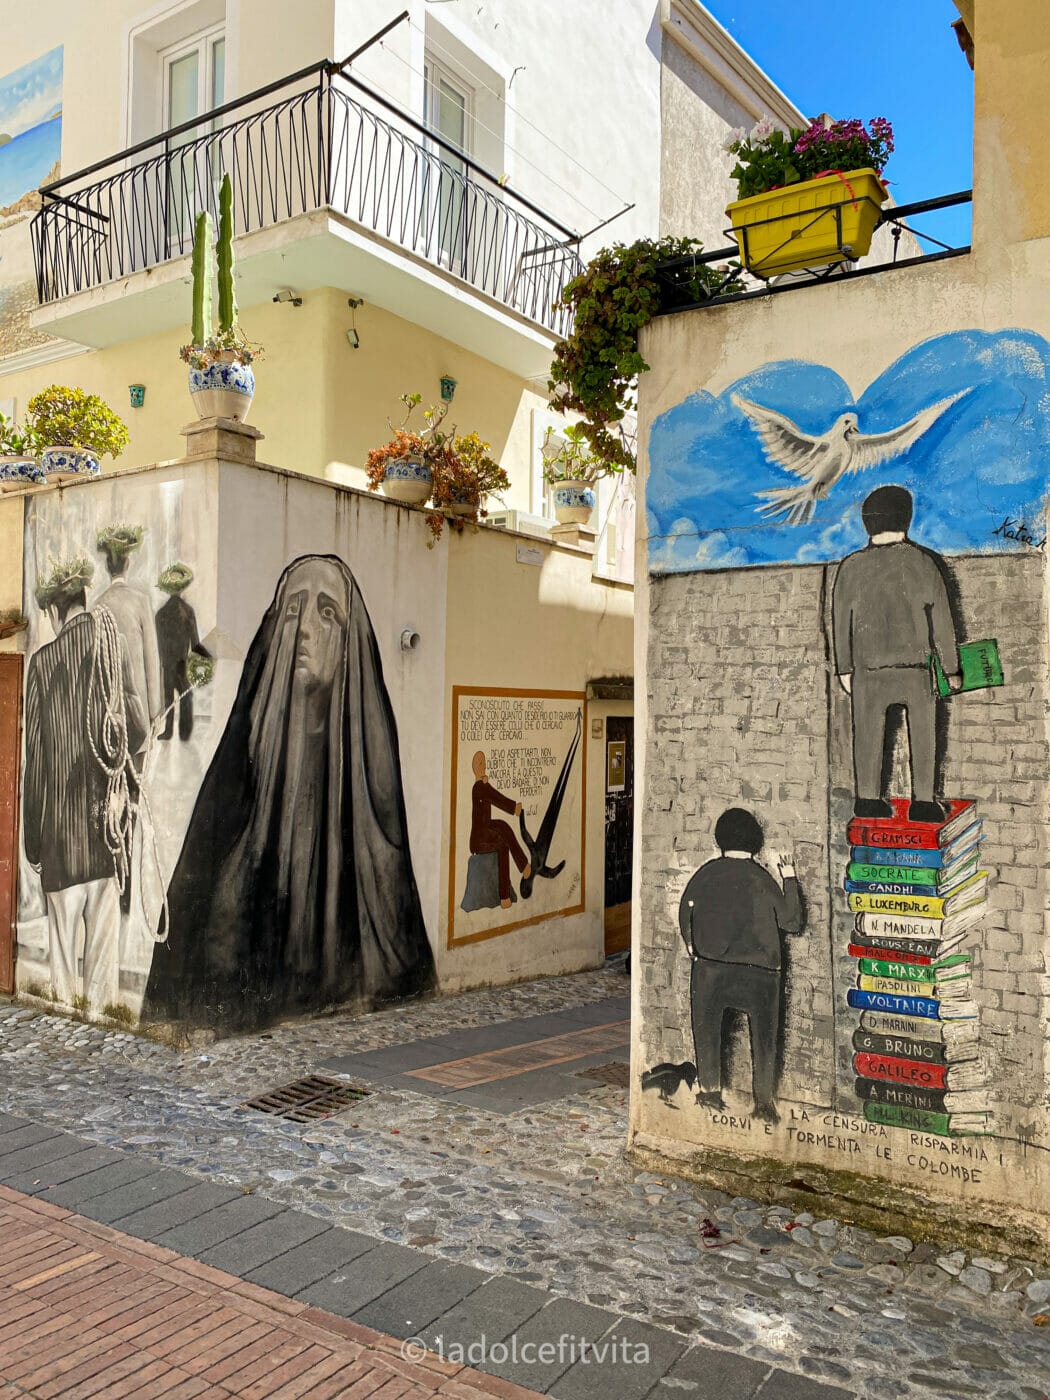 street art on the corners of buildings in Diamante Calabria